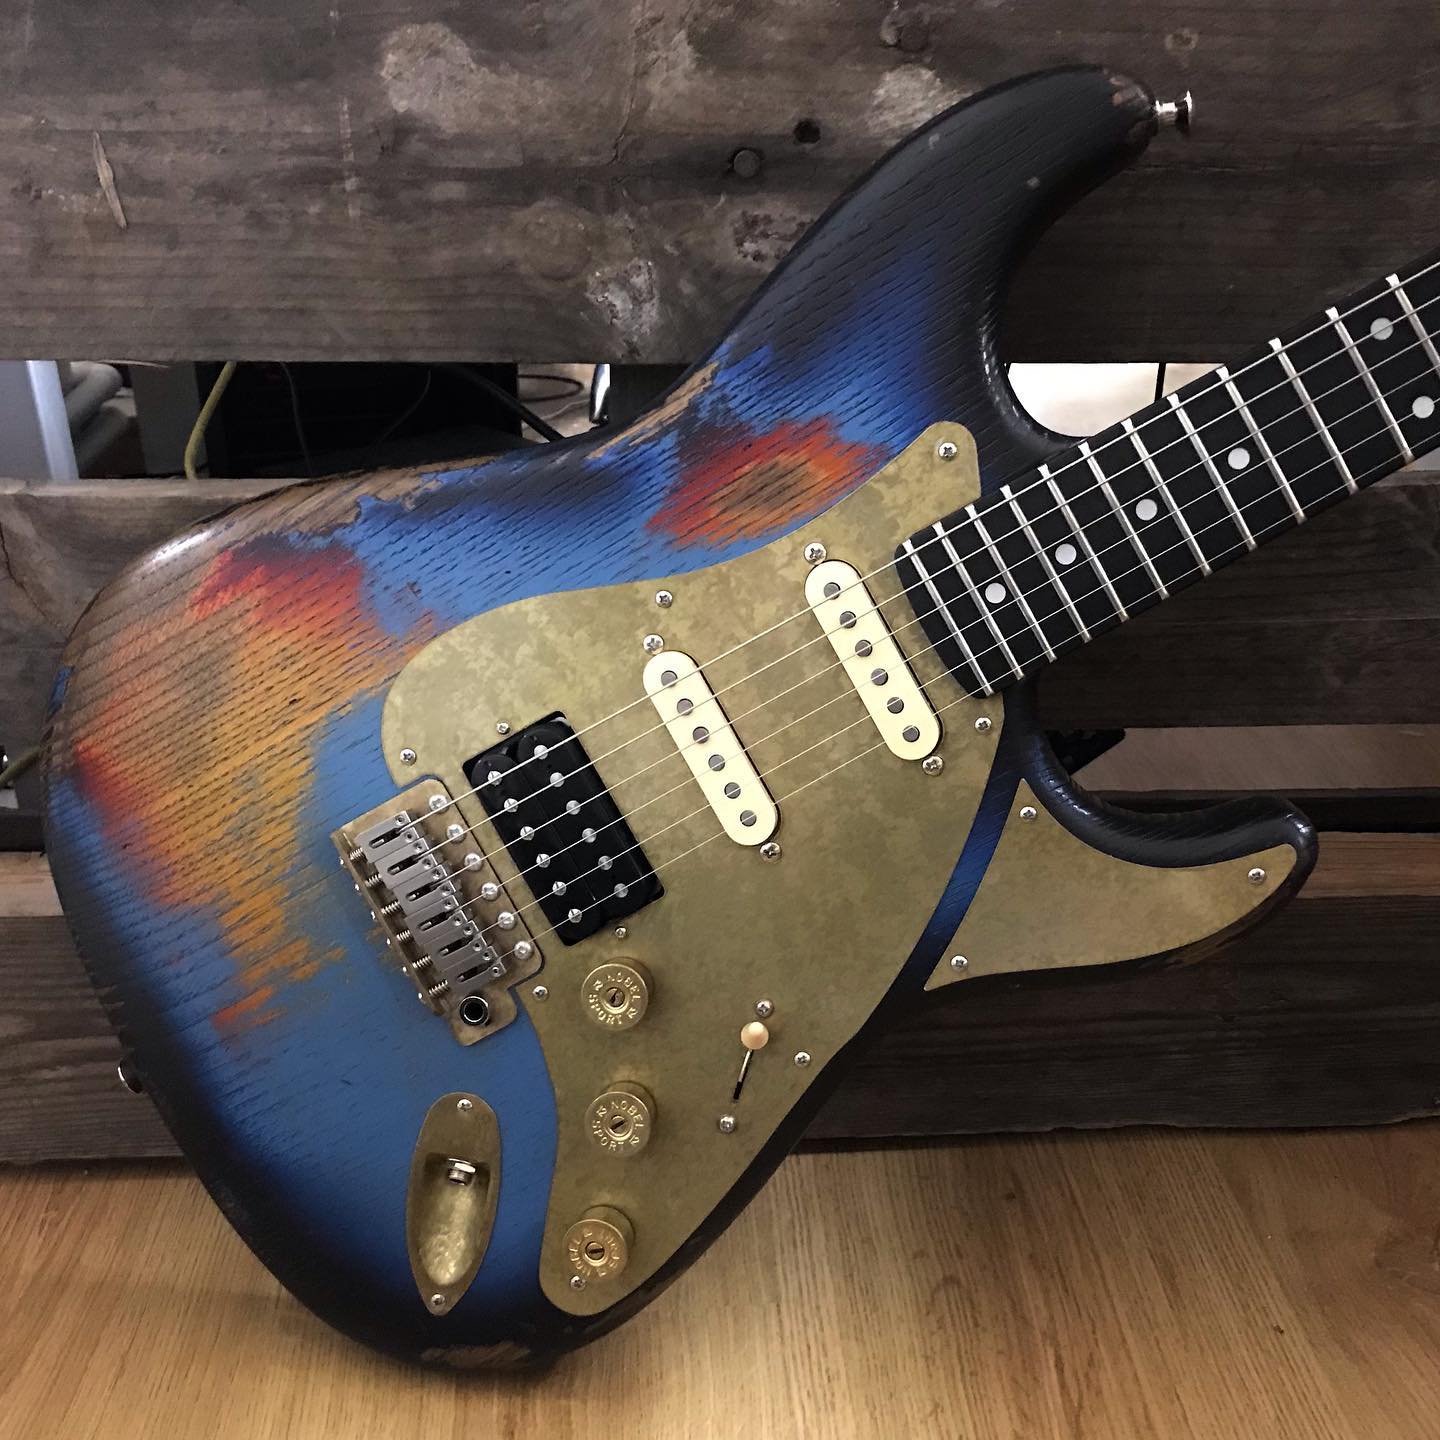 Paoletti Guitars Are One Their Way!!  (And This One Is Already Available)